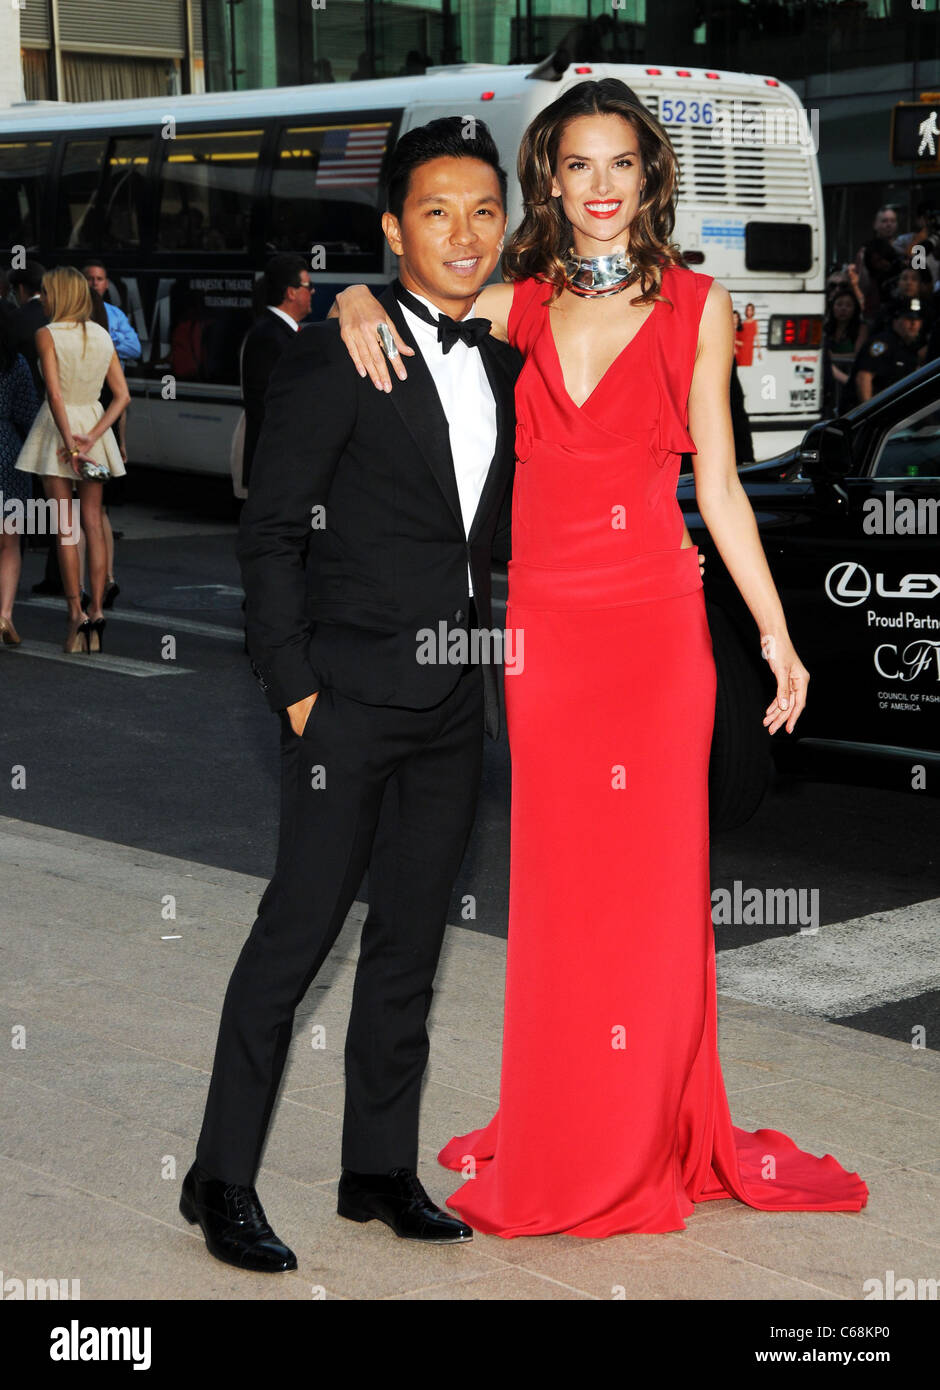 Prabal Gurung, Alessandra Ambrosio at arrivals for The 2011 CFDA Fashion Awards, Alice Tully Hall at Lincoln Center, New York, NY June 6, 2011. Photo By: Desiree Navarro/Everett Collection Stock Photo